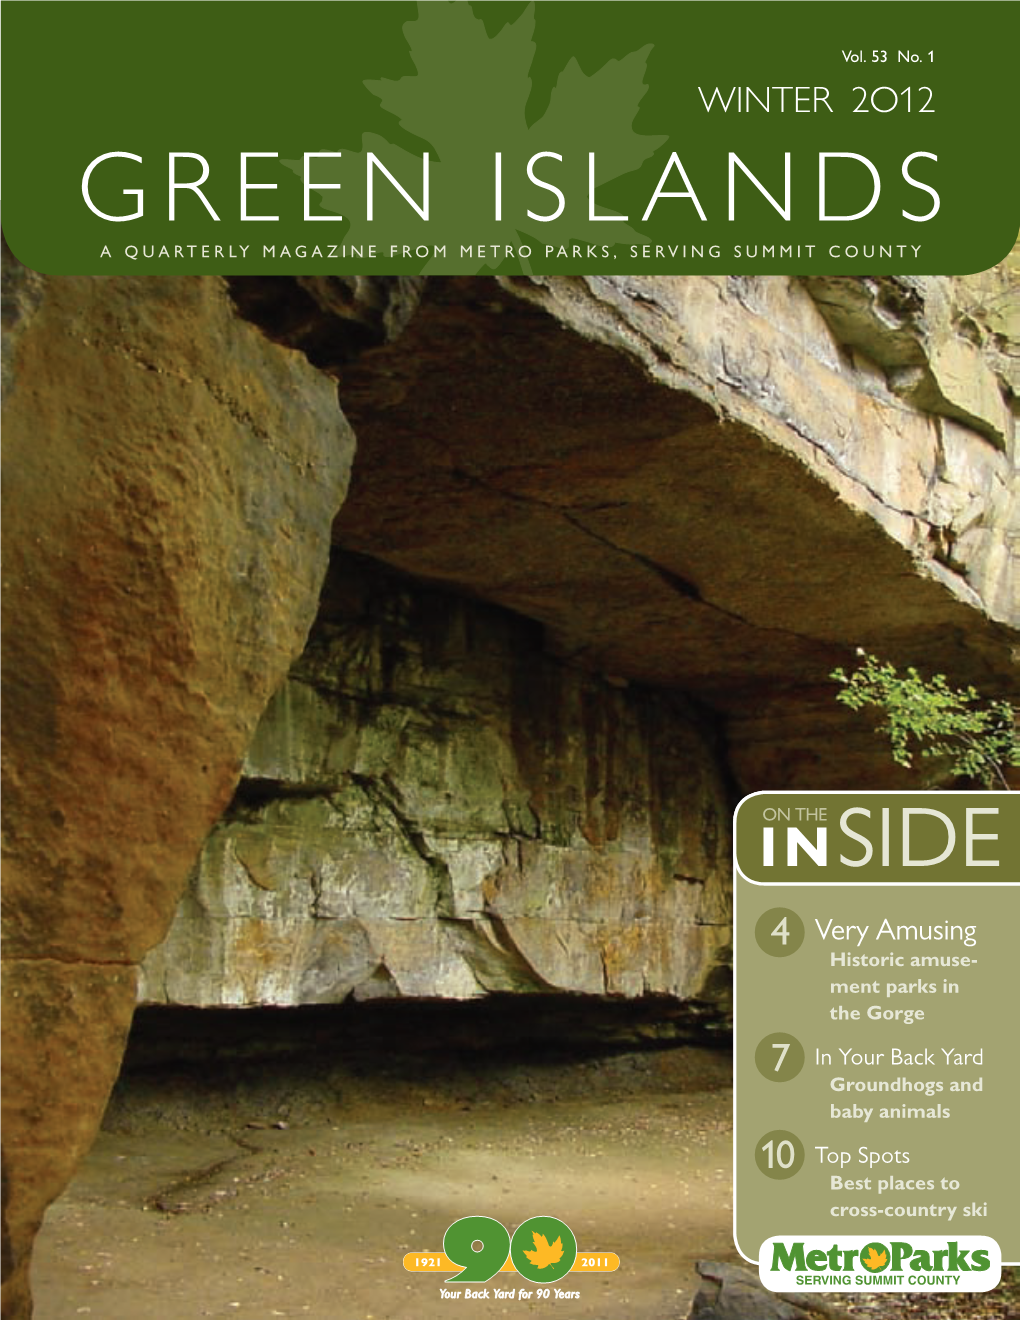 Green Islands a Quarterly Magazine from Metro Parks, Serving Summit County